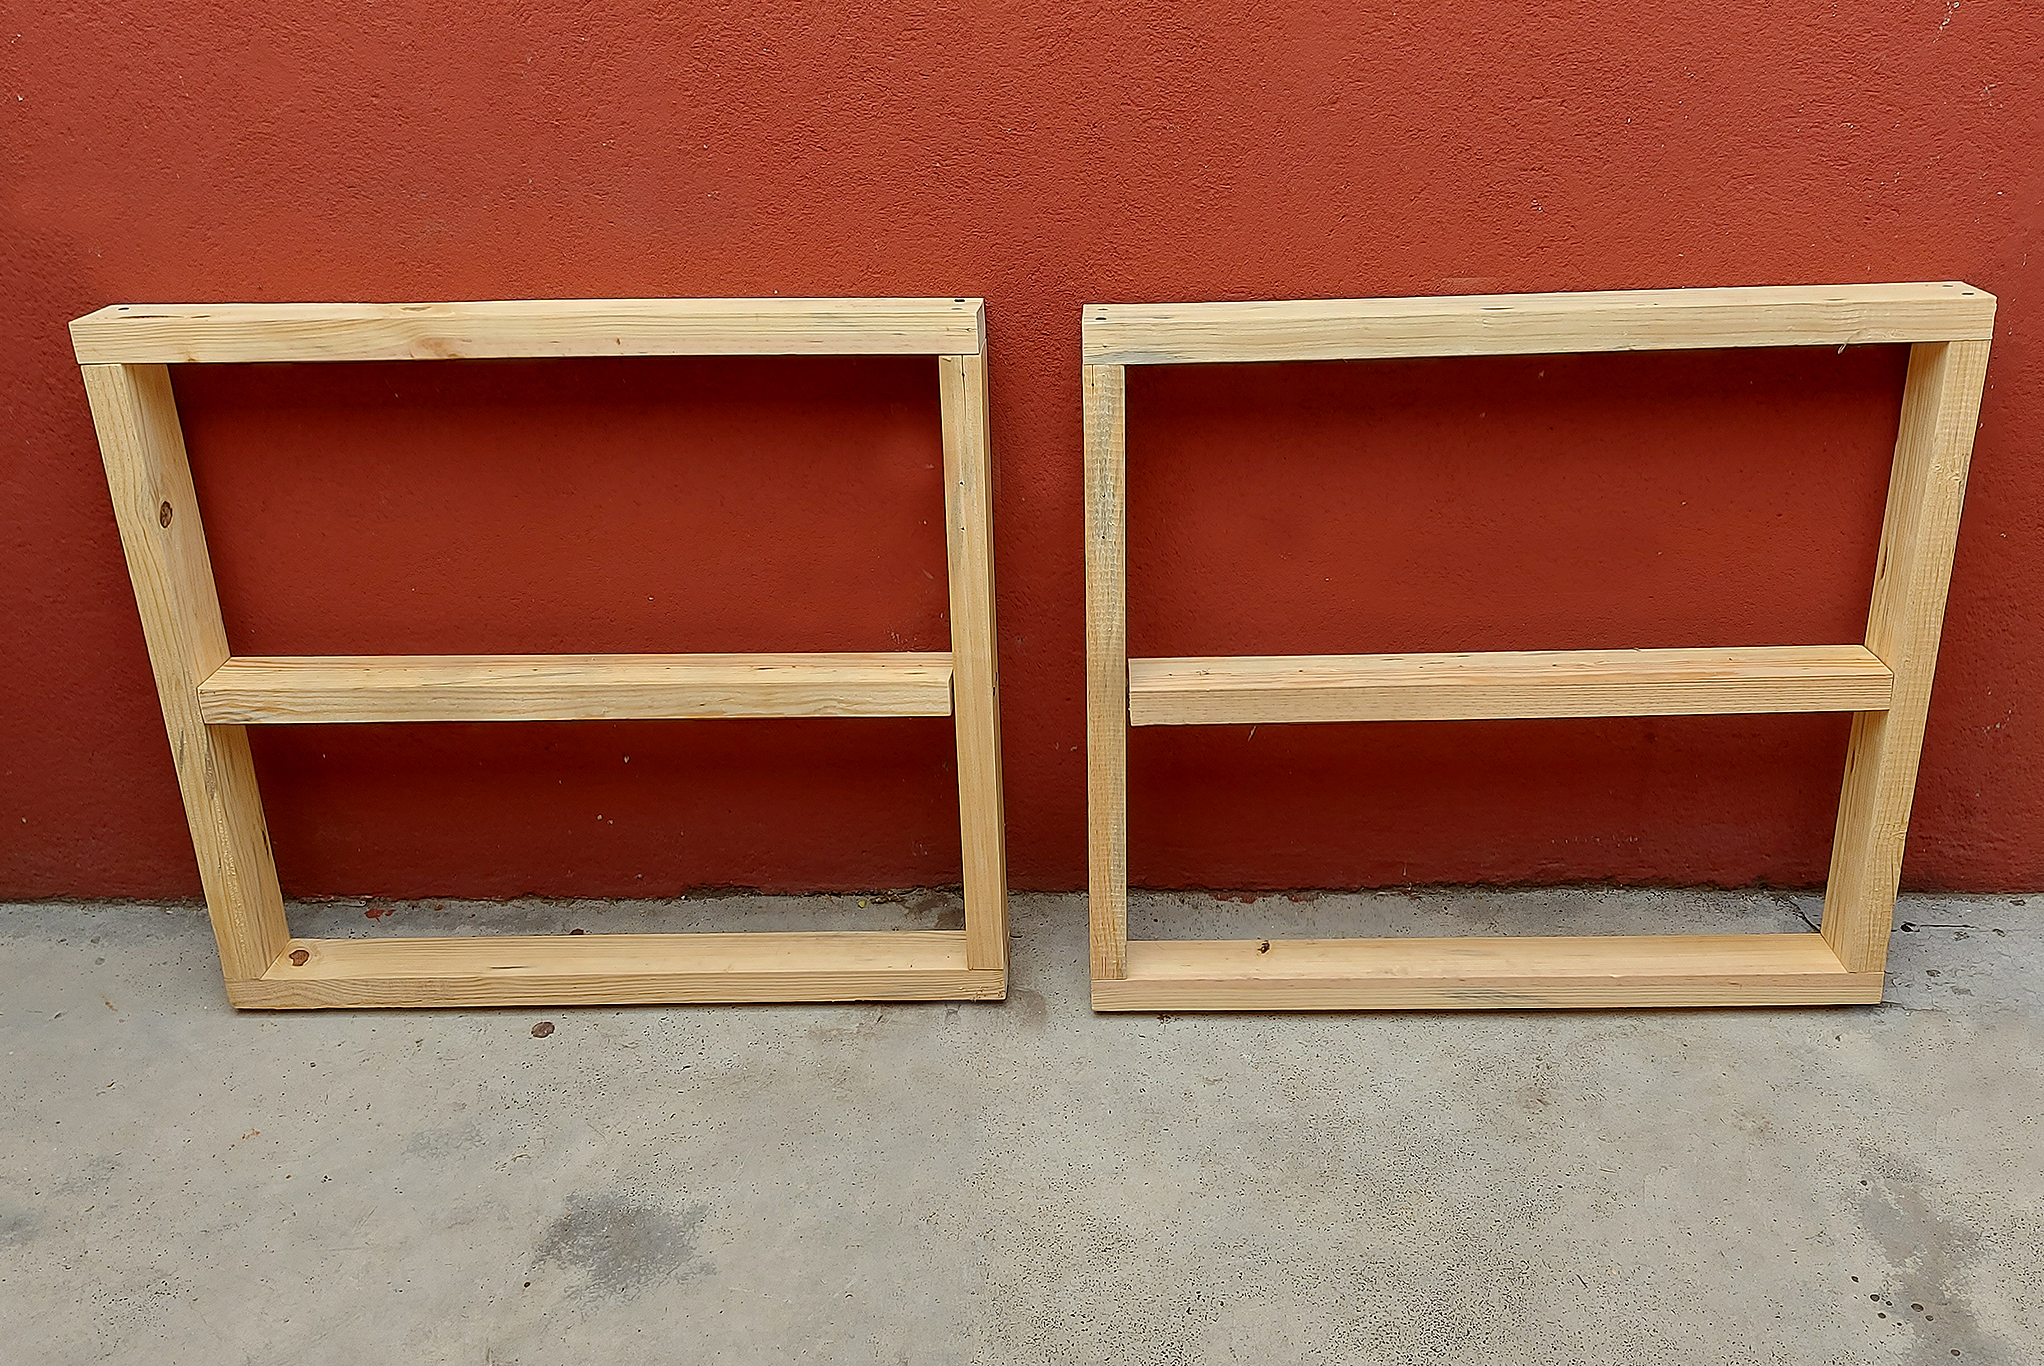 Instructables_Wooden_Chair_Frames_01.png